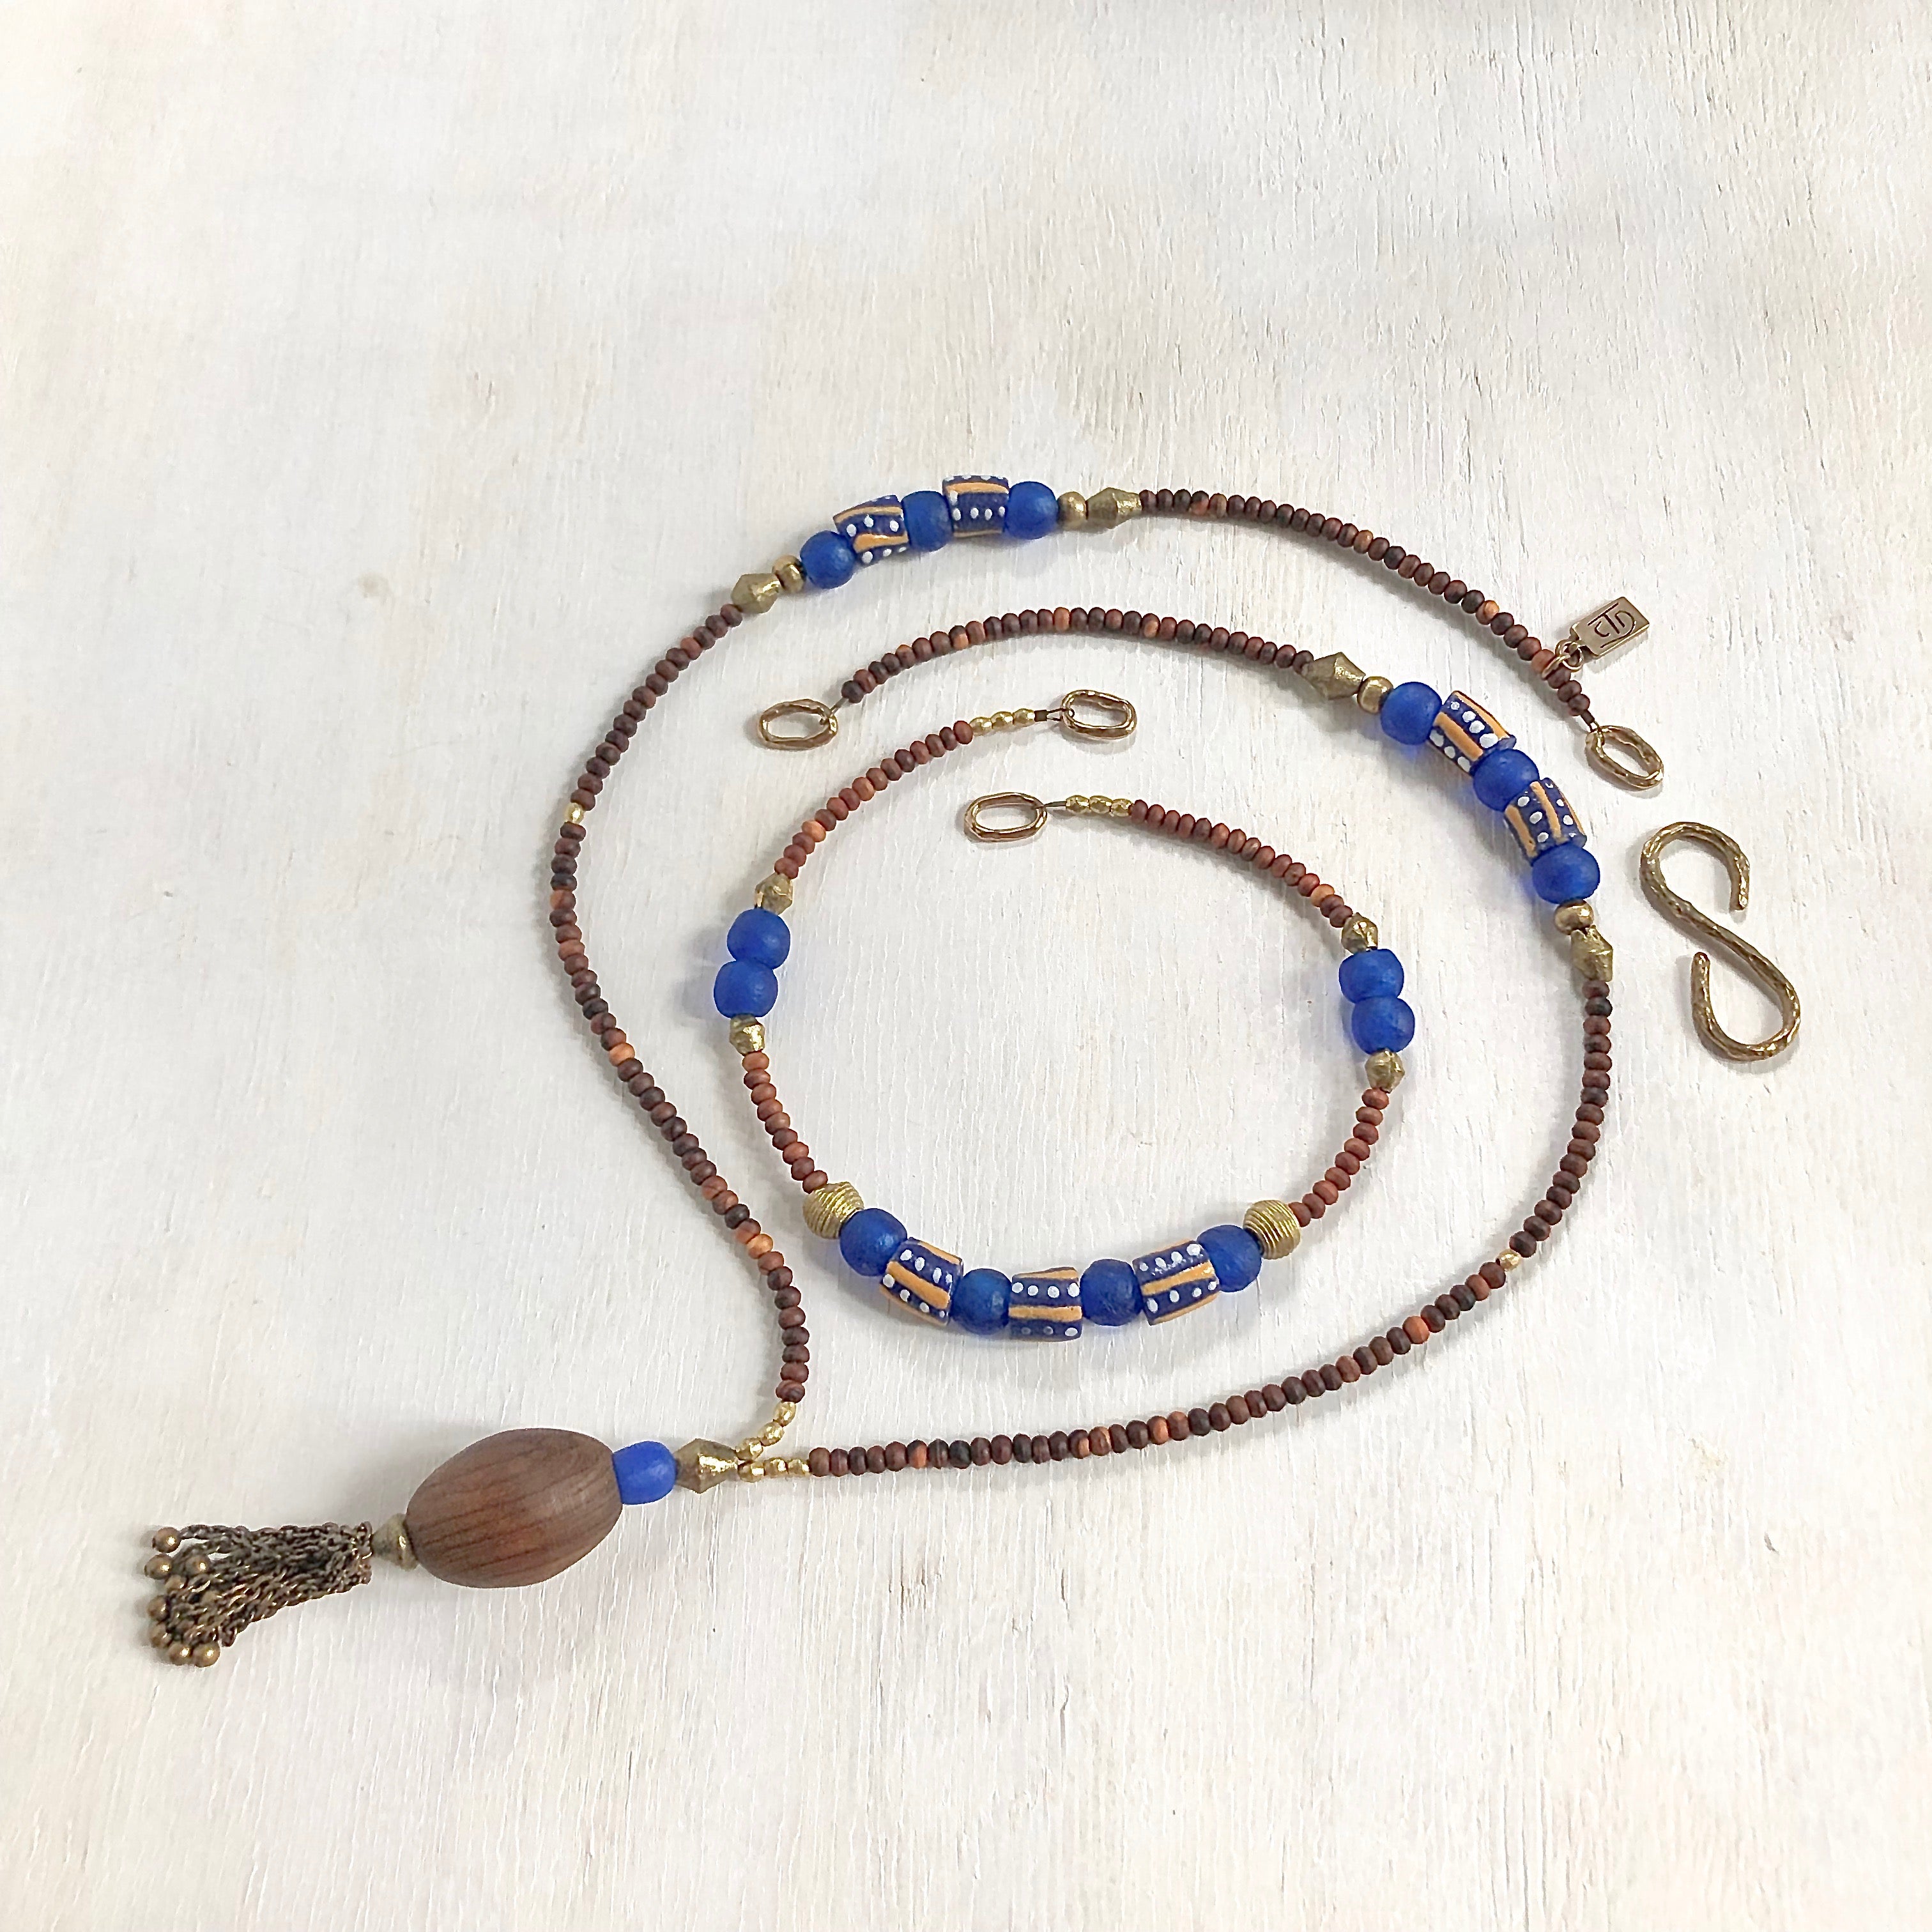 Hand painted blue yellow African beads with vintage olive wood pendant long necklace. Cristina Tamames Jewelry Designer